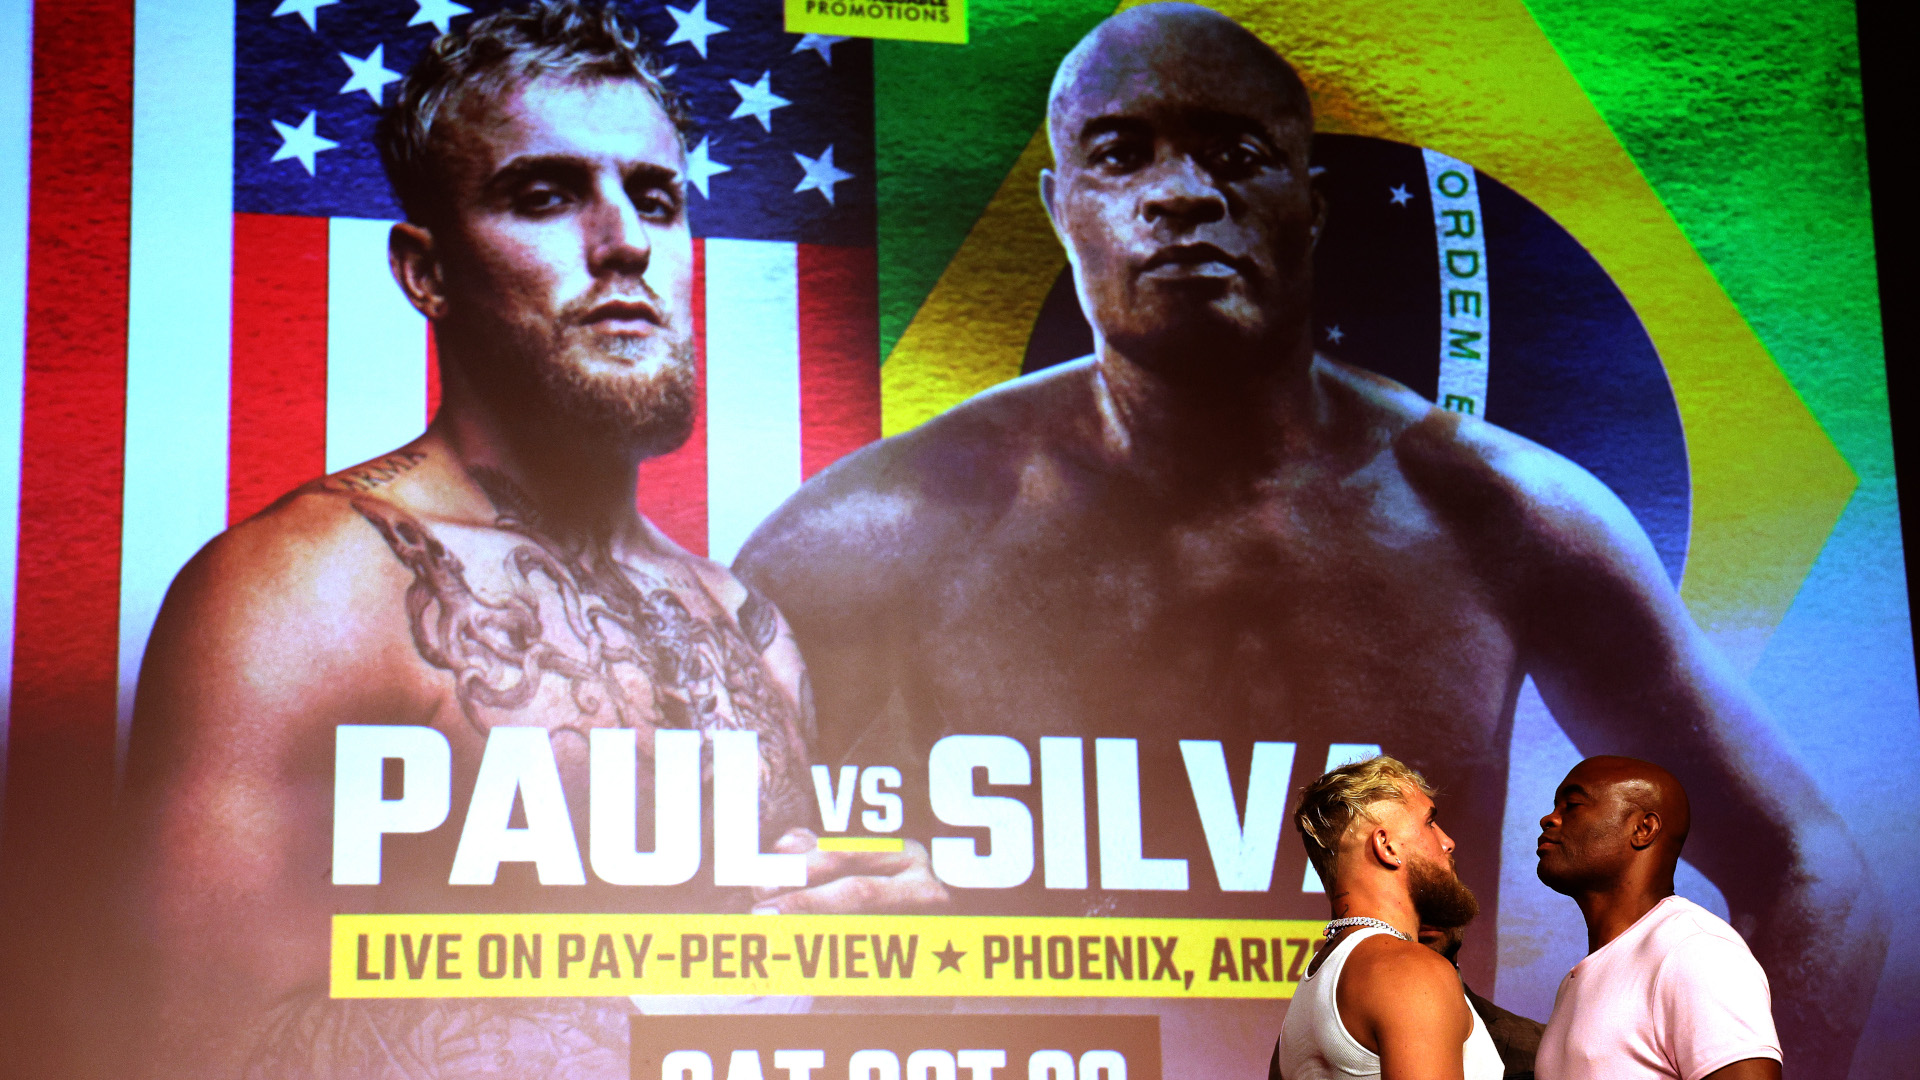 Jake Paul vs Anderson Silva live stream how to watch the full fight online today, start time, PPV prices T3